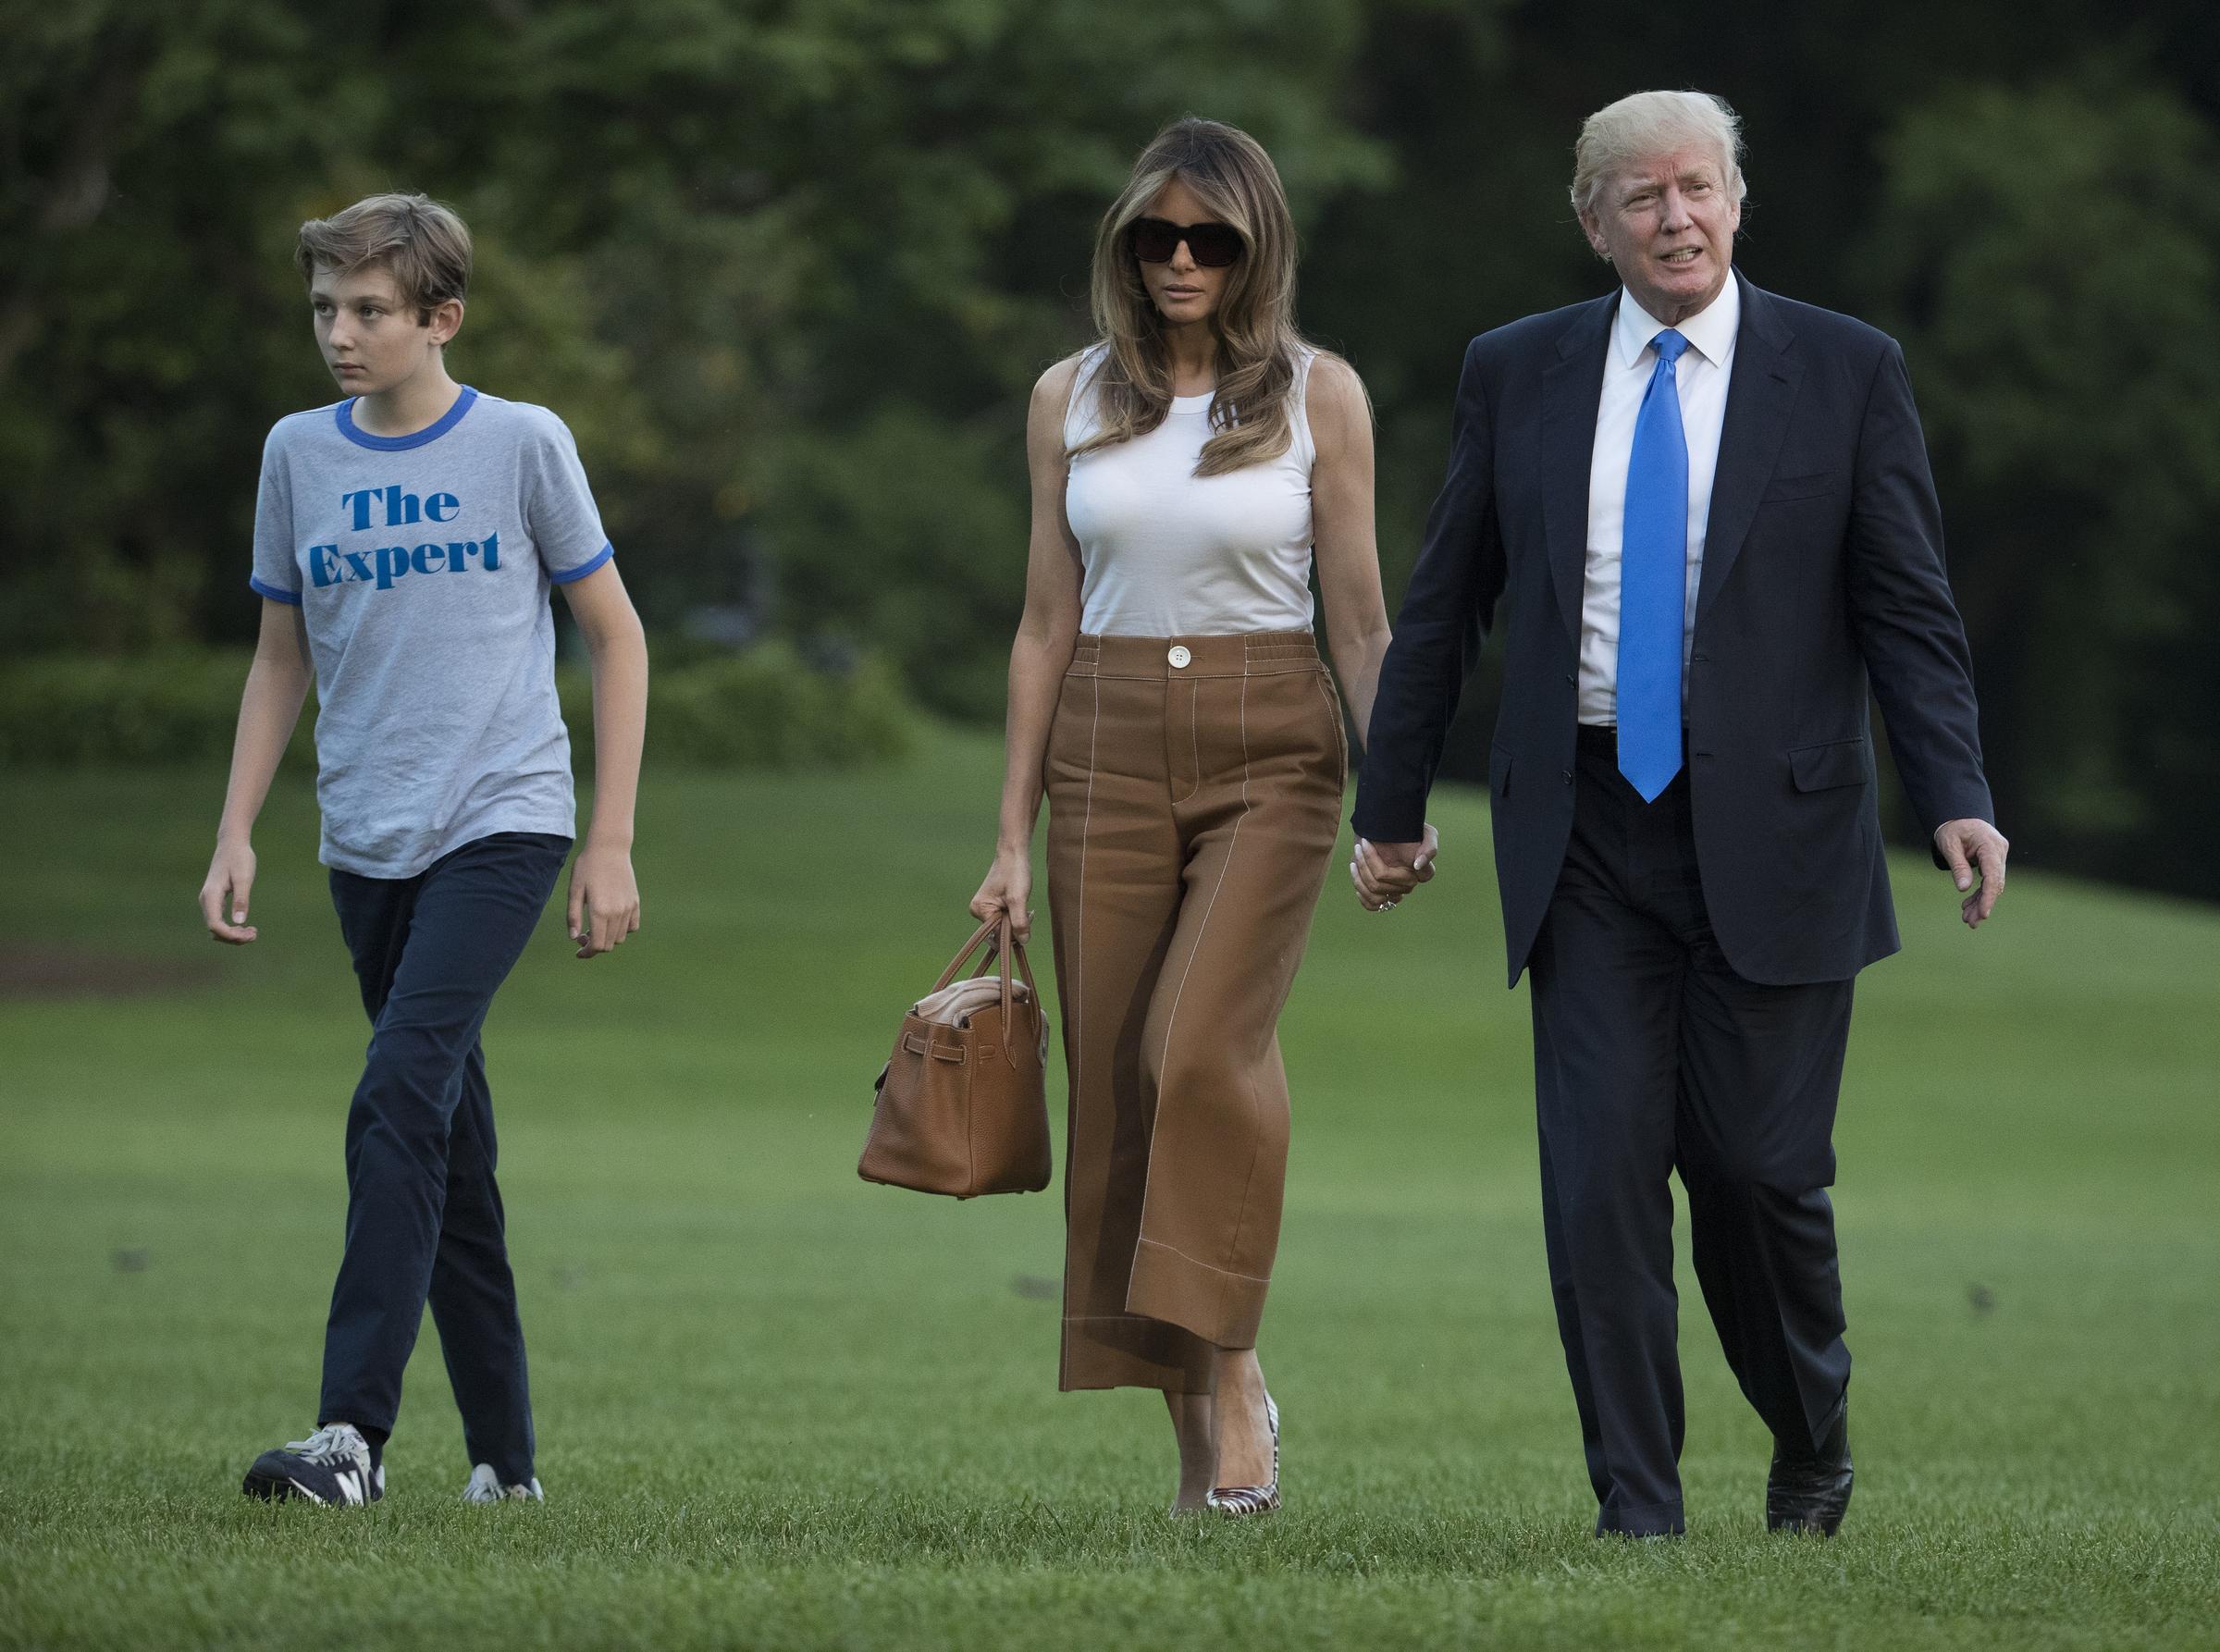 Image result for melania trump with son